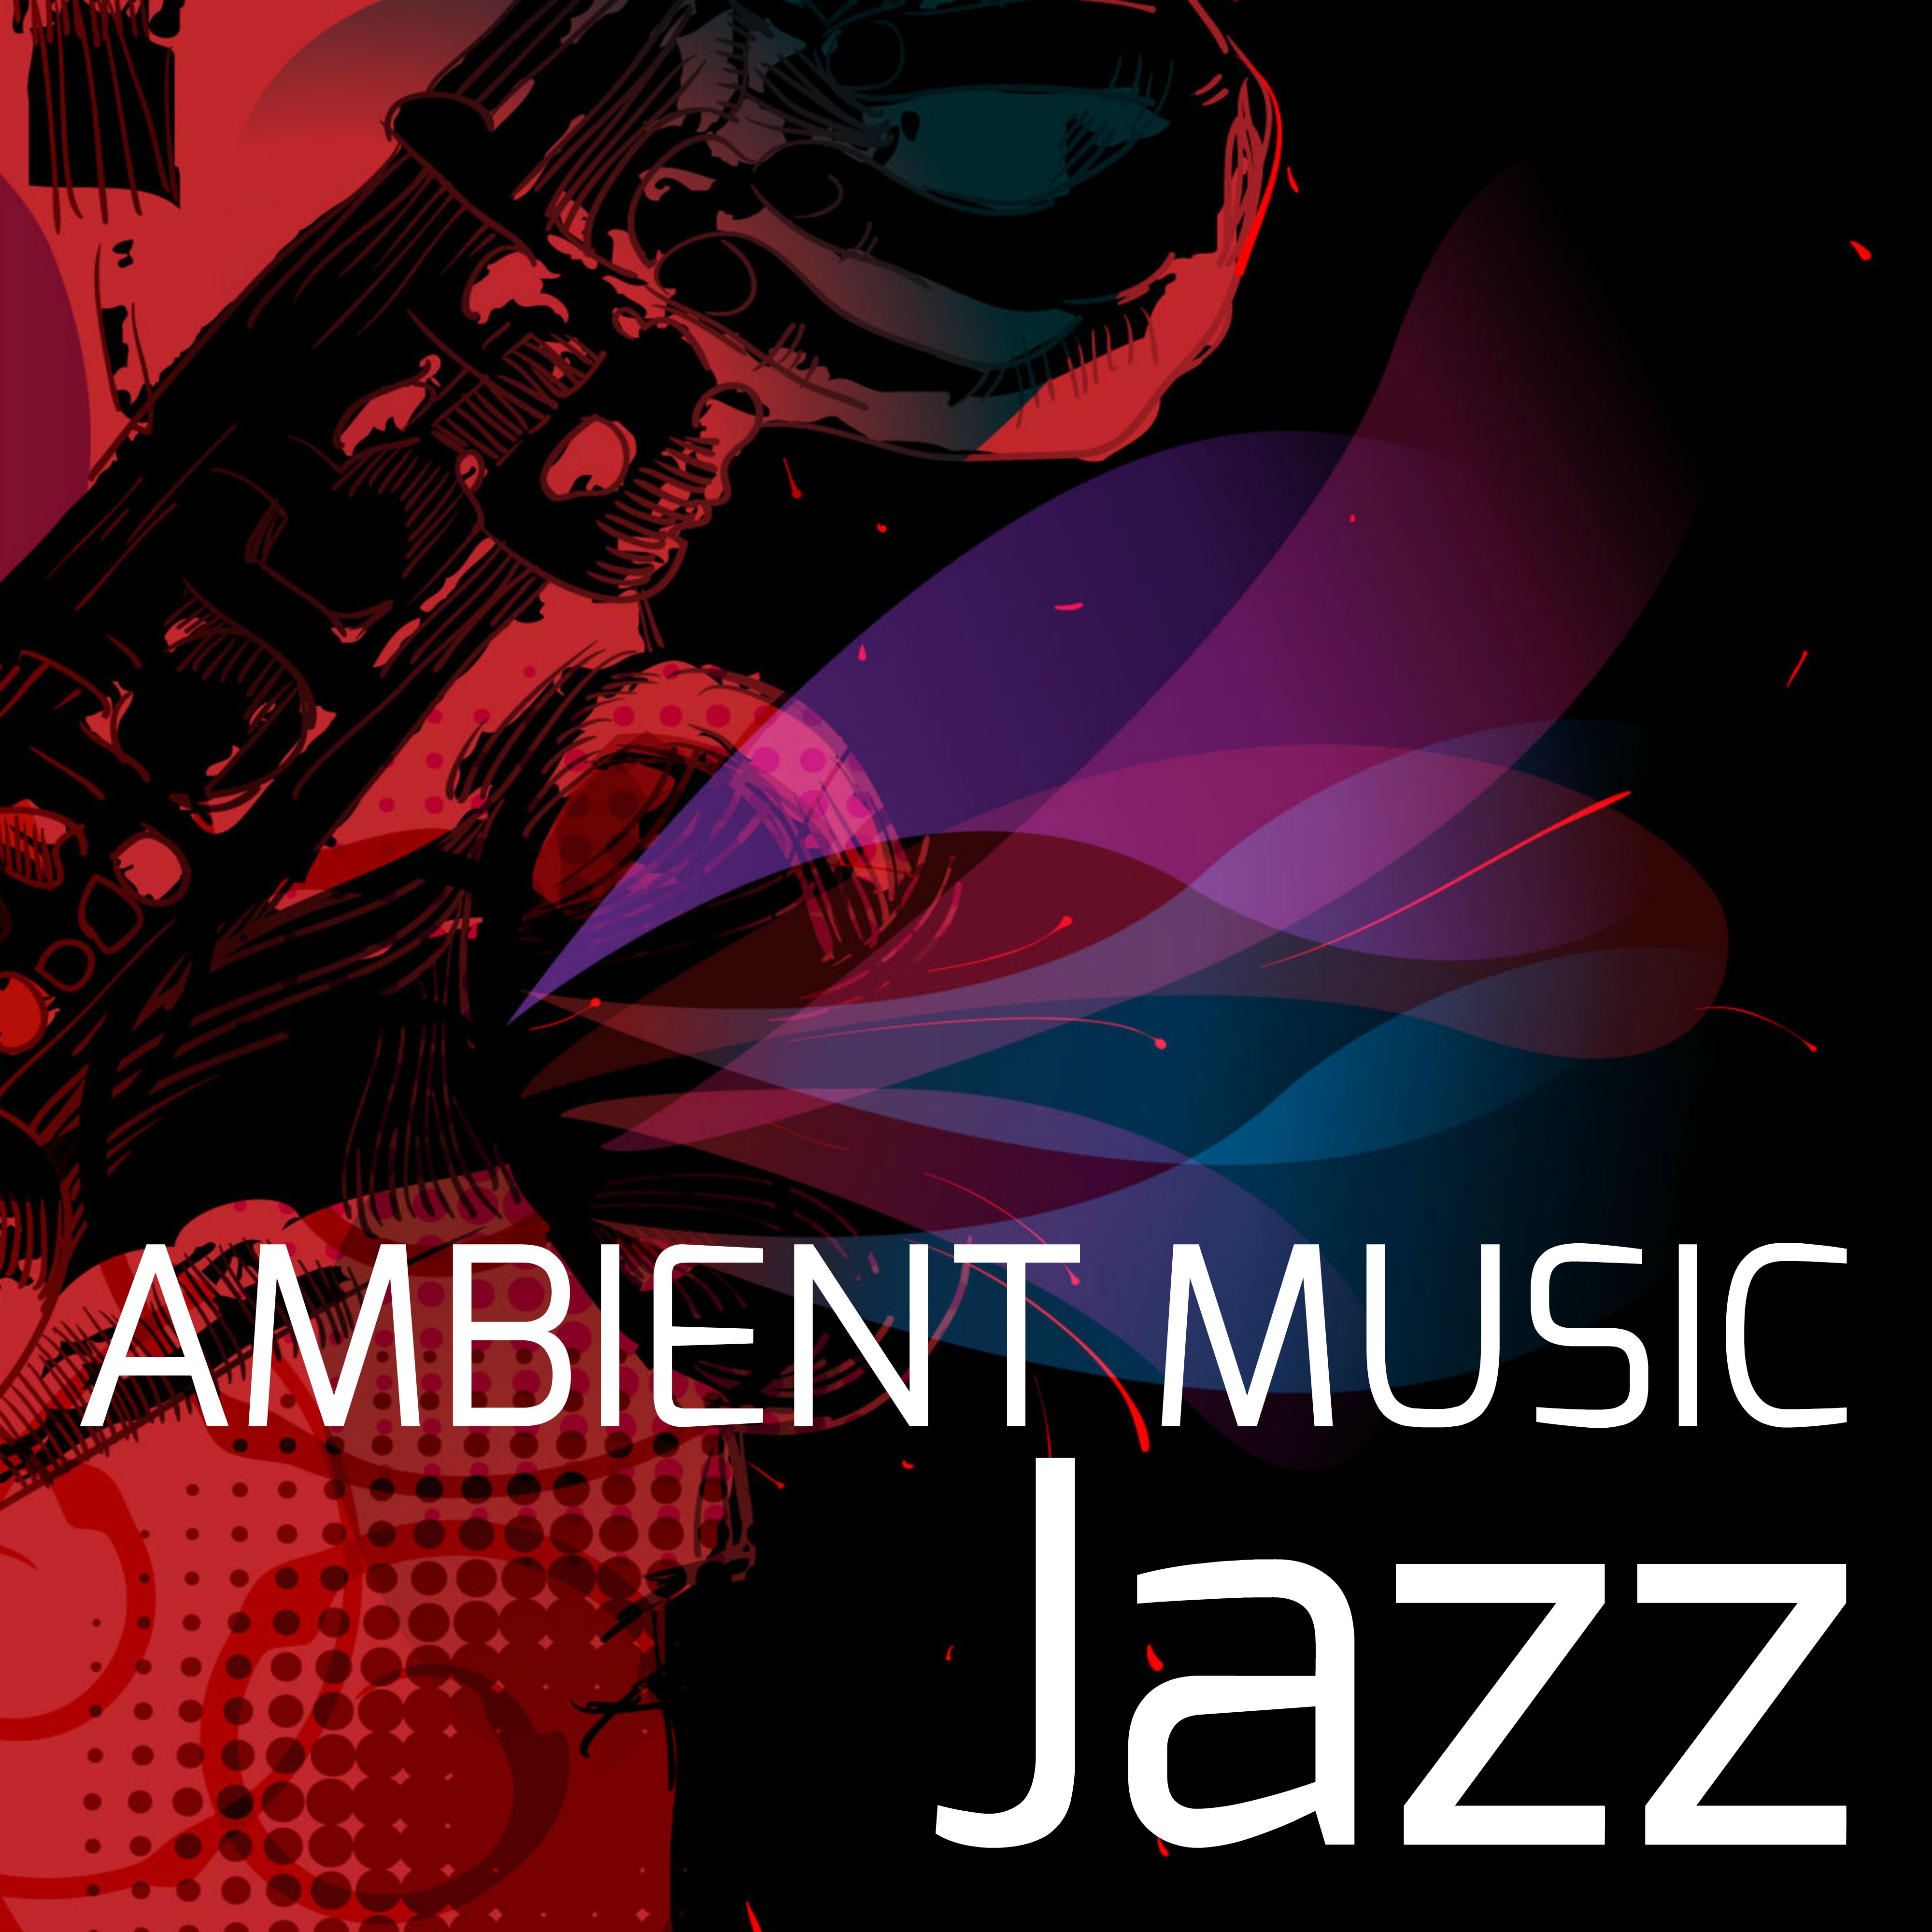 Ambient Music Jazz – Compilation Jazz, Waiting Room, Lift & Elevator Music for Relaxation and Stress Relief